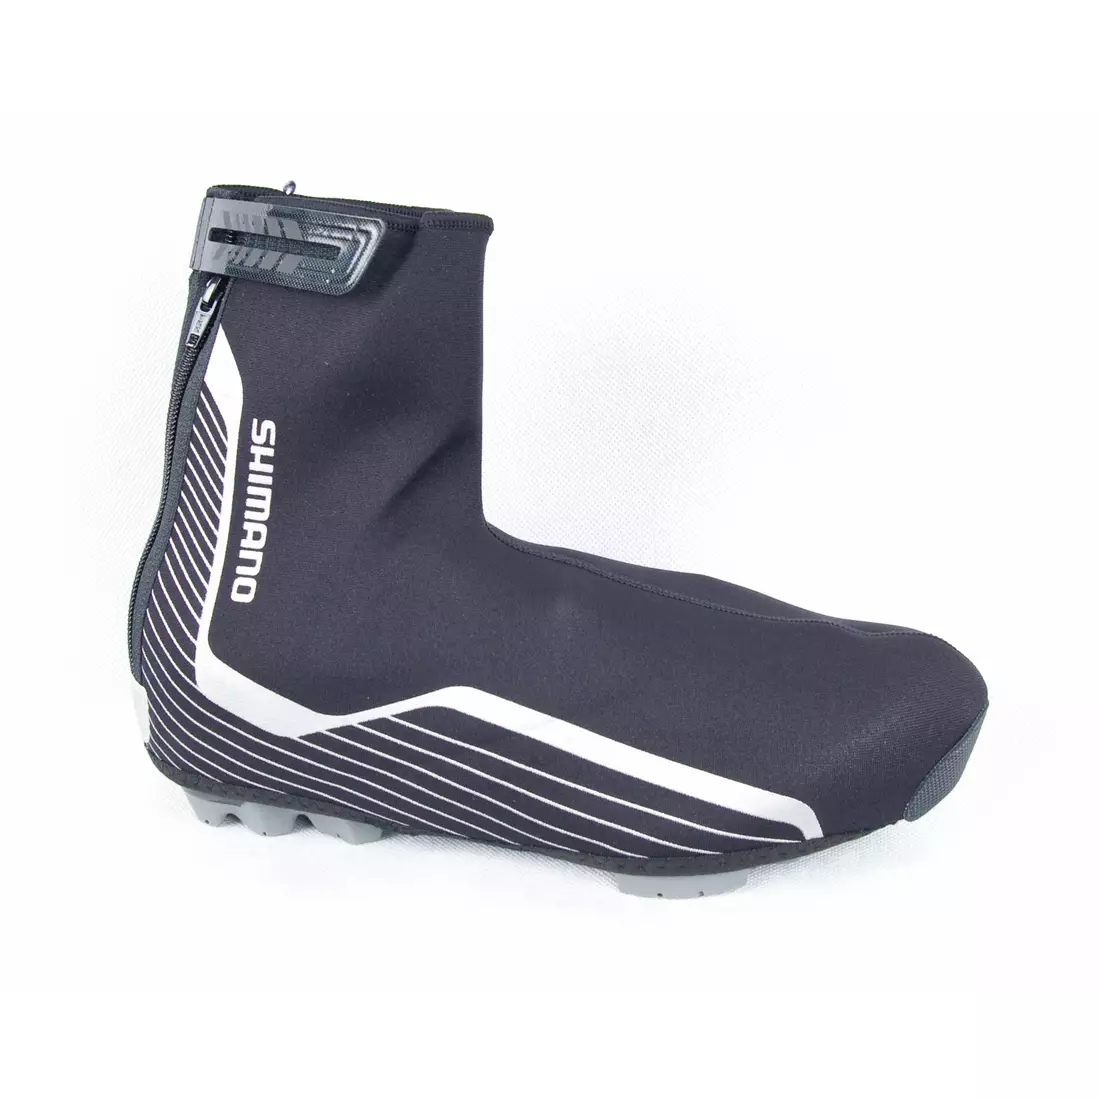 SHIMANO CLASSIC neoprene MTB protectors for cycling shoes CW-FABW-MS31UL